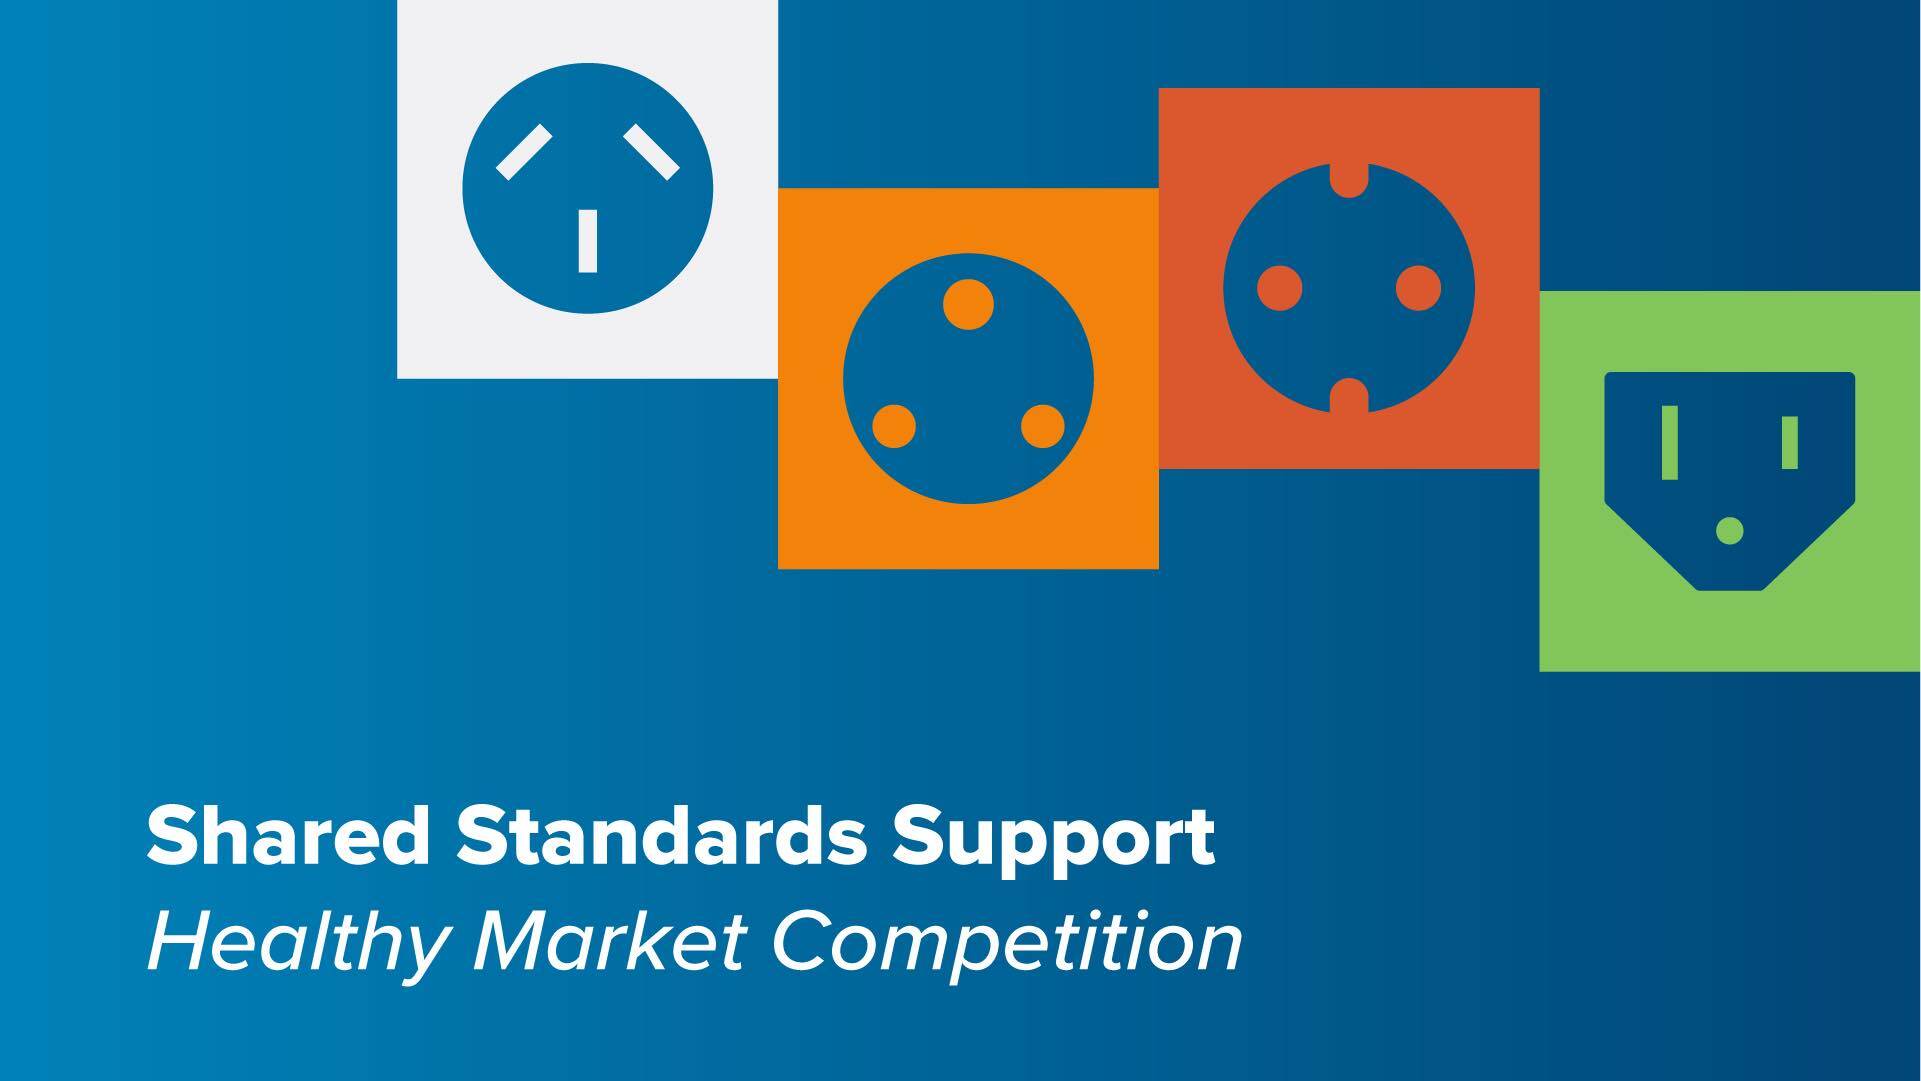 Shared standards support healthy market competition